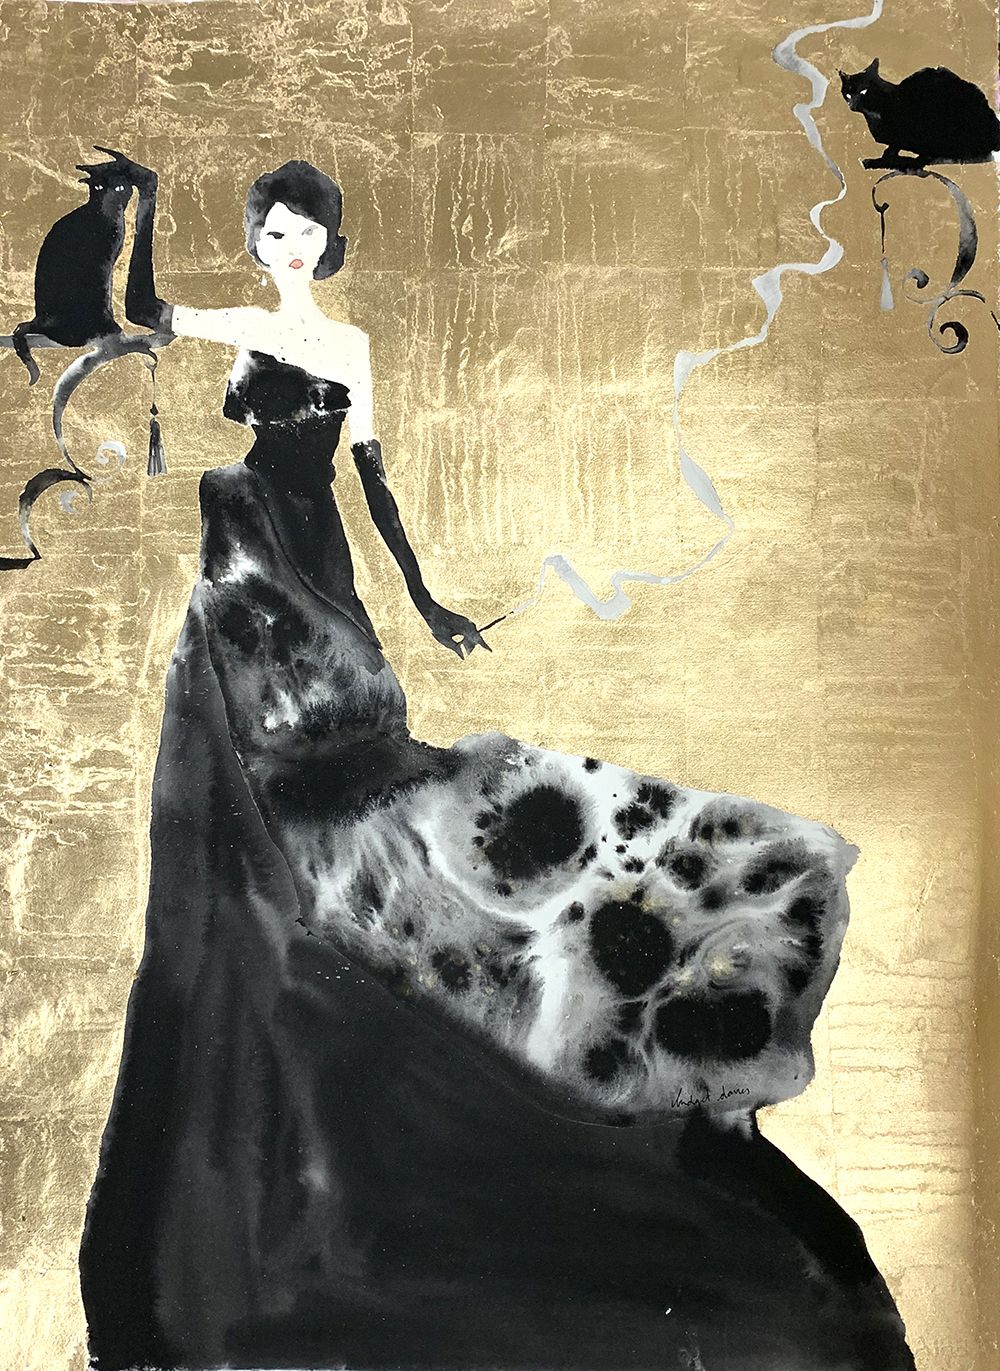 The Smoking Lady and Her Lucky Cat by Bridget Davies